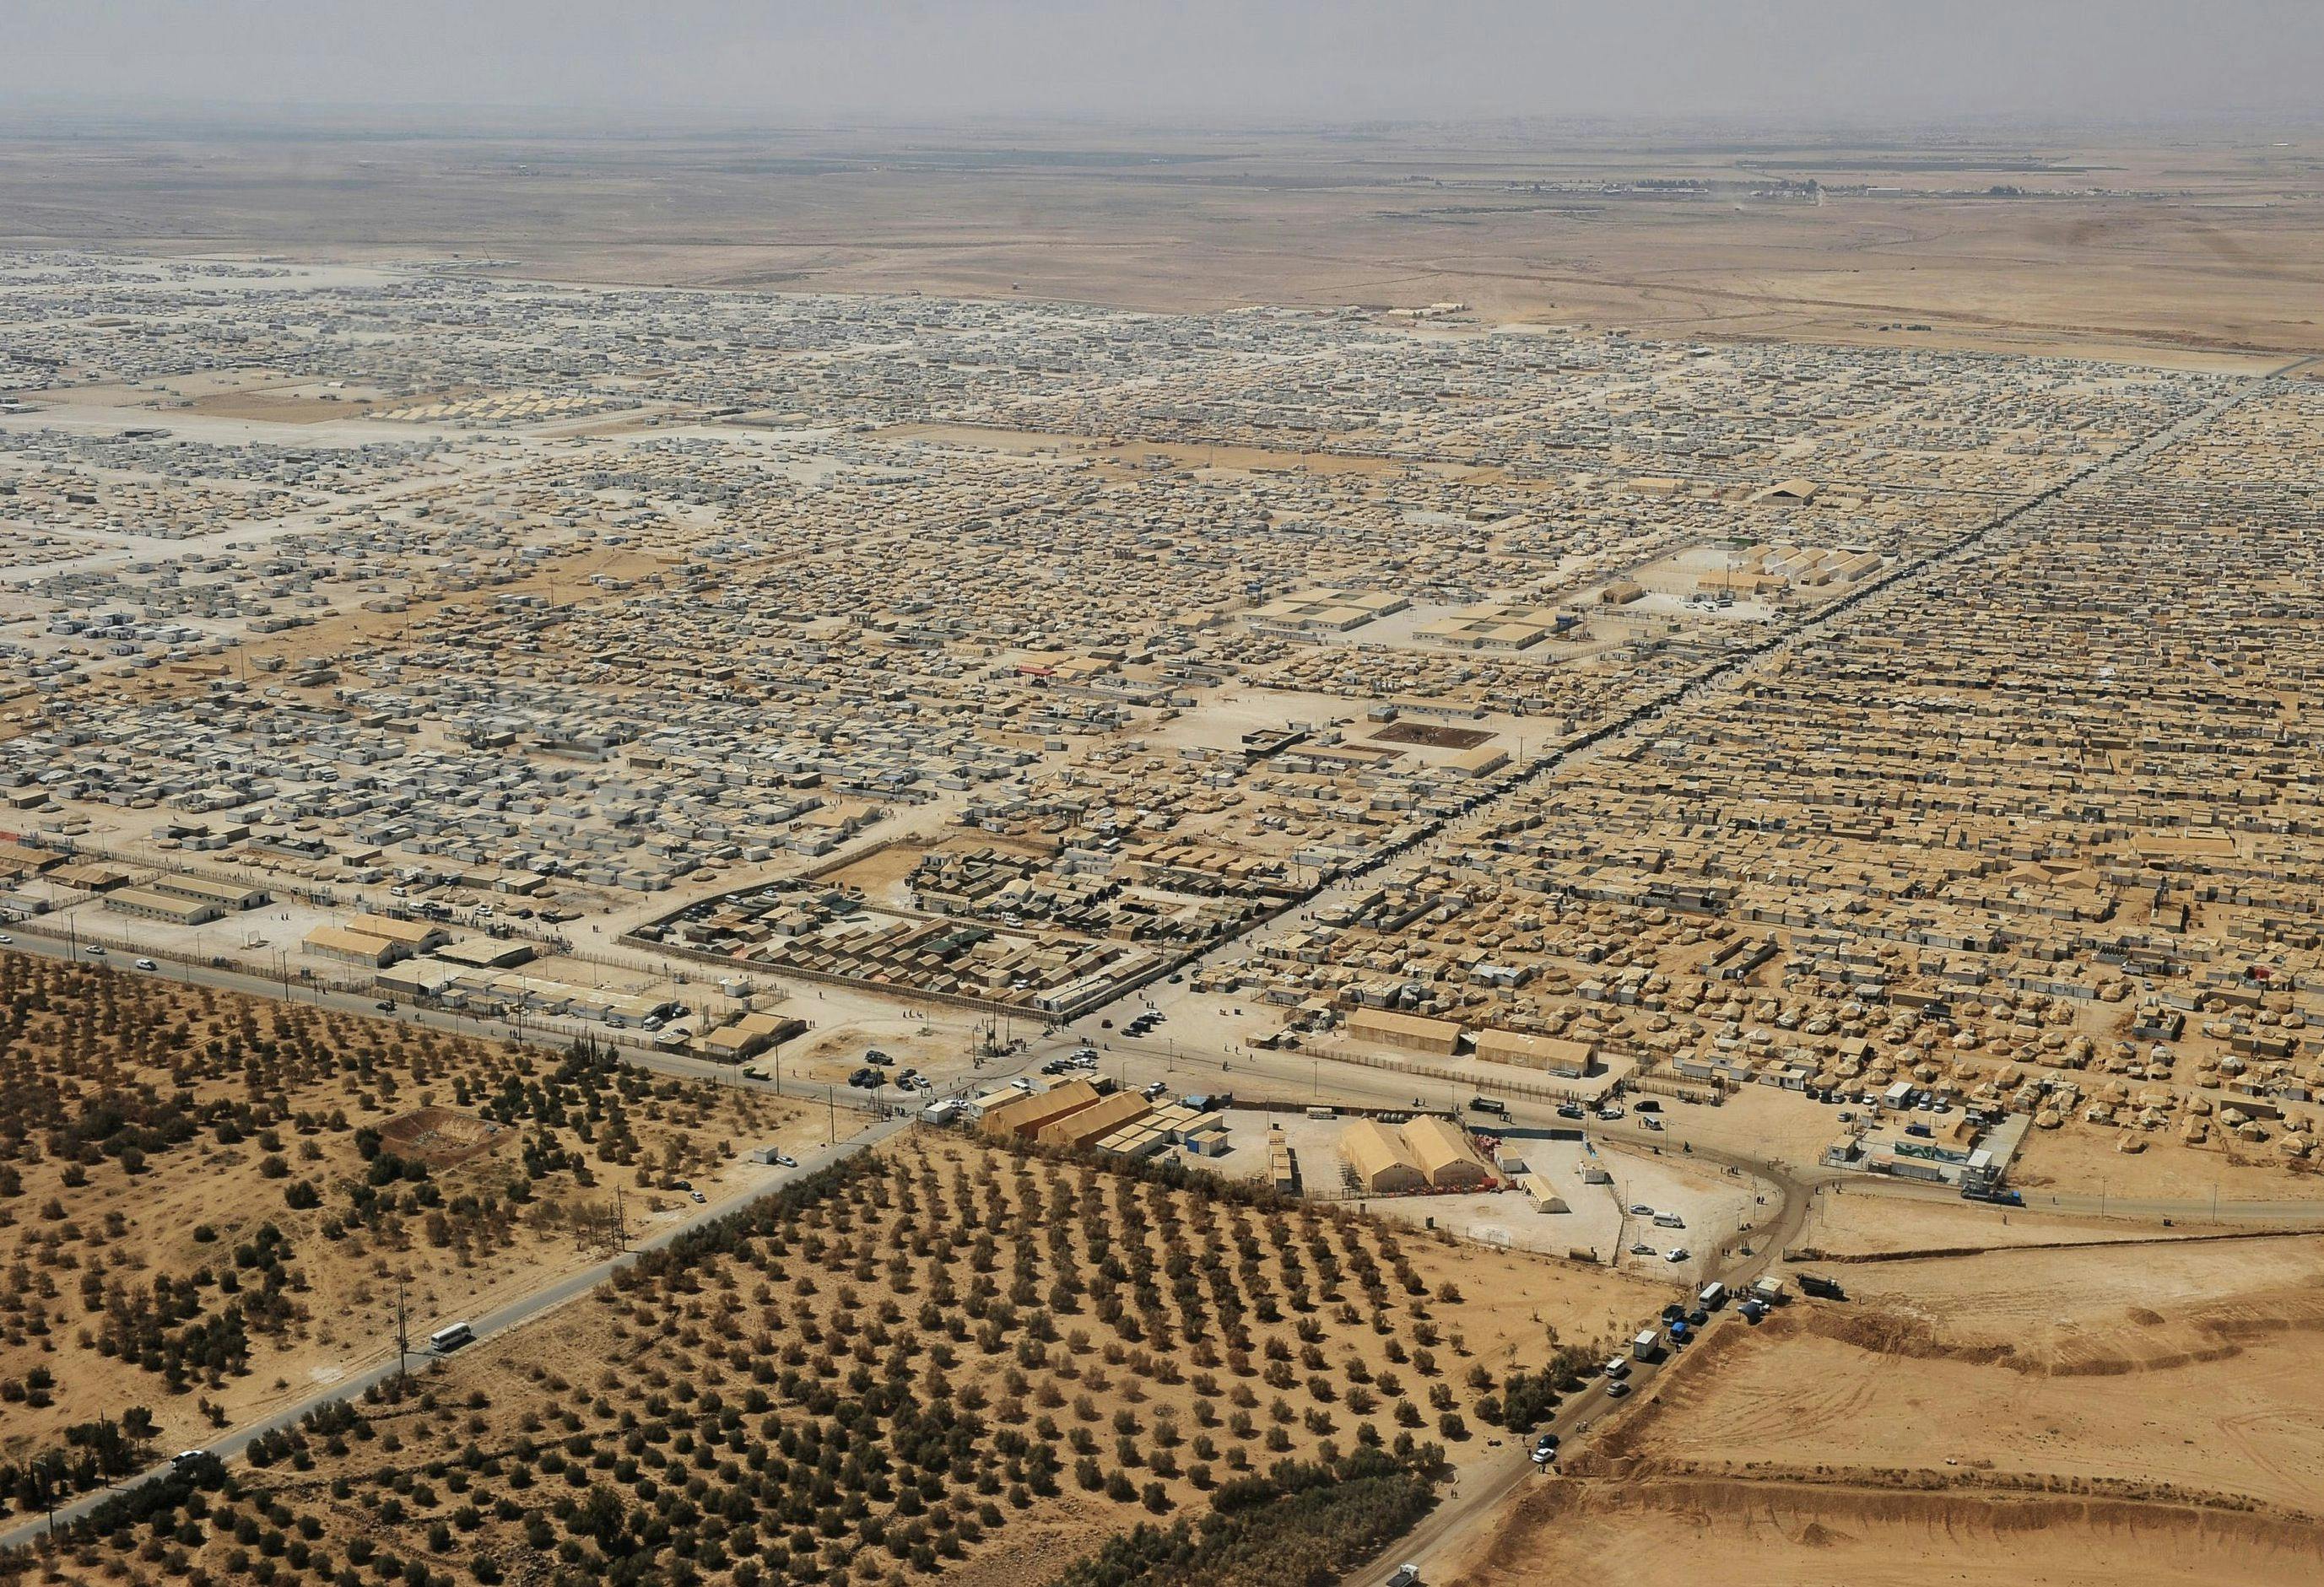  This enormous Syrian refugee camp is now Jordan's 5th largest city (photographer: Harrison Jacobs, source: www.businessinsider.com.au) 